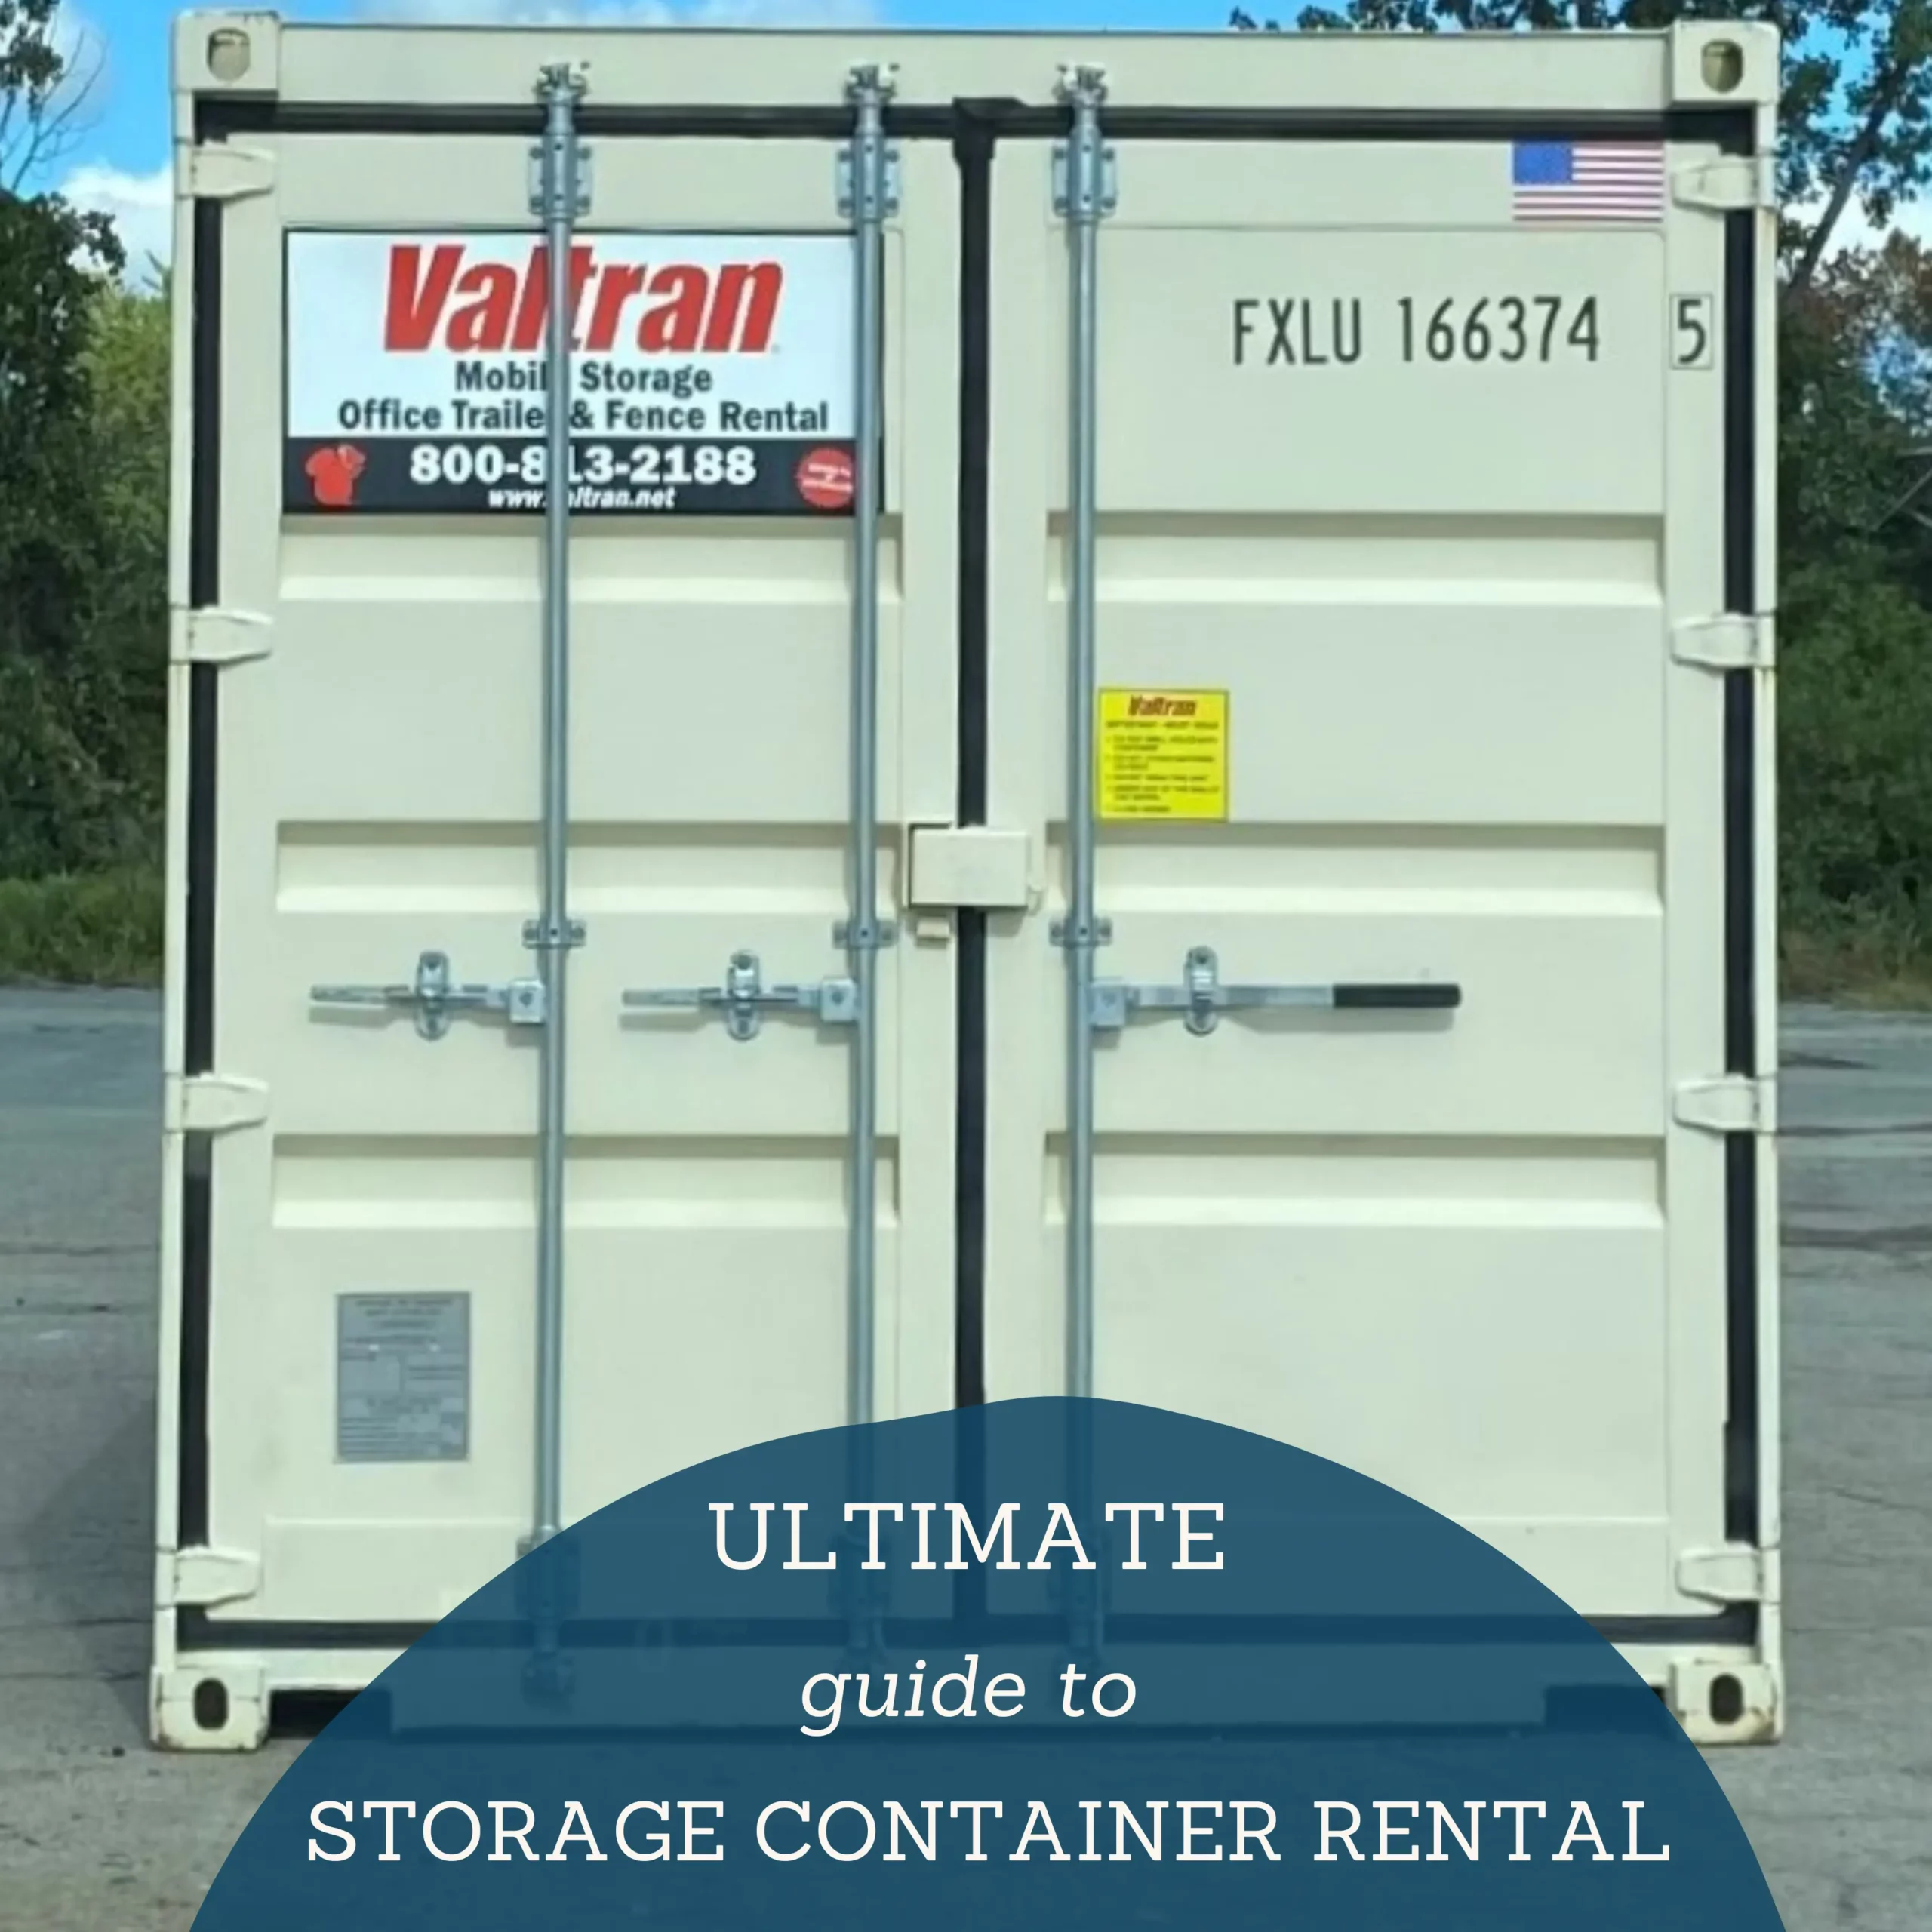 Tan Valtran Standard 20' storage container on pavement, with text overlay reading 'The Ultimate Guide to Storage Container Rental'.